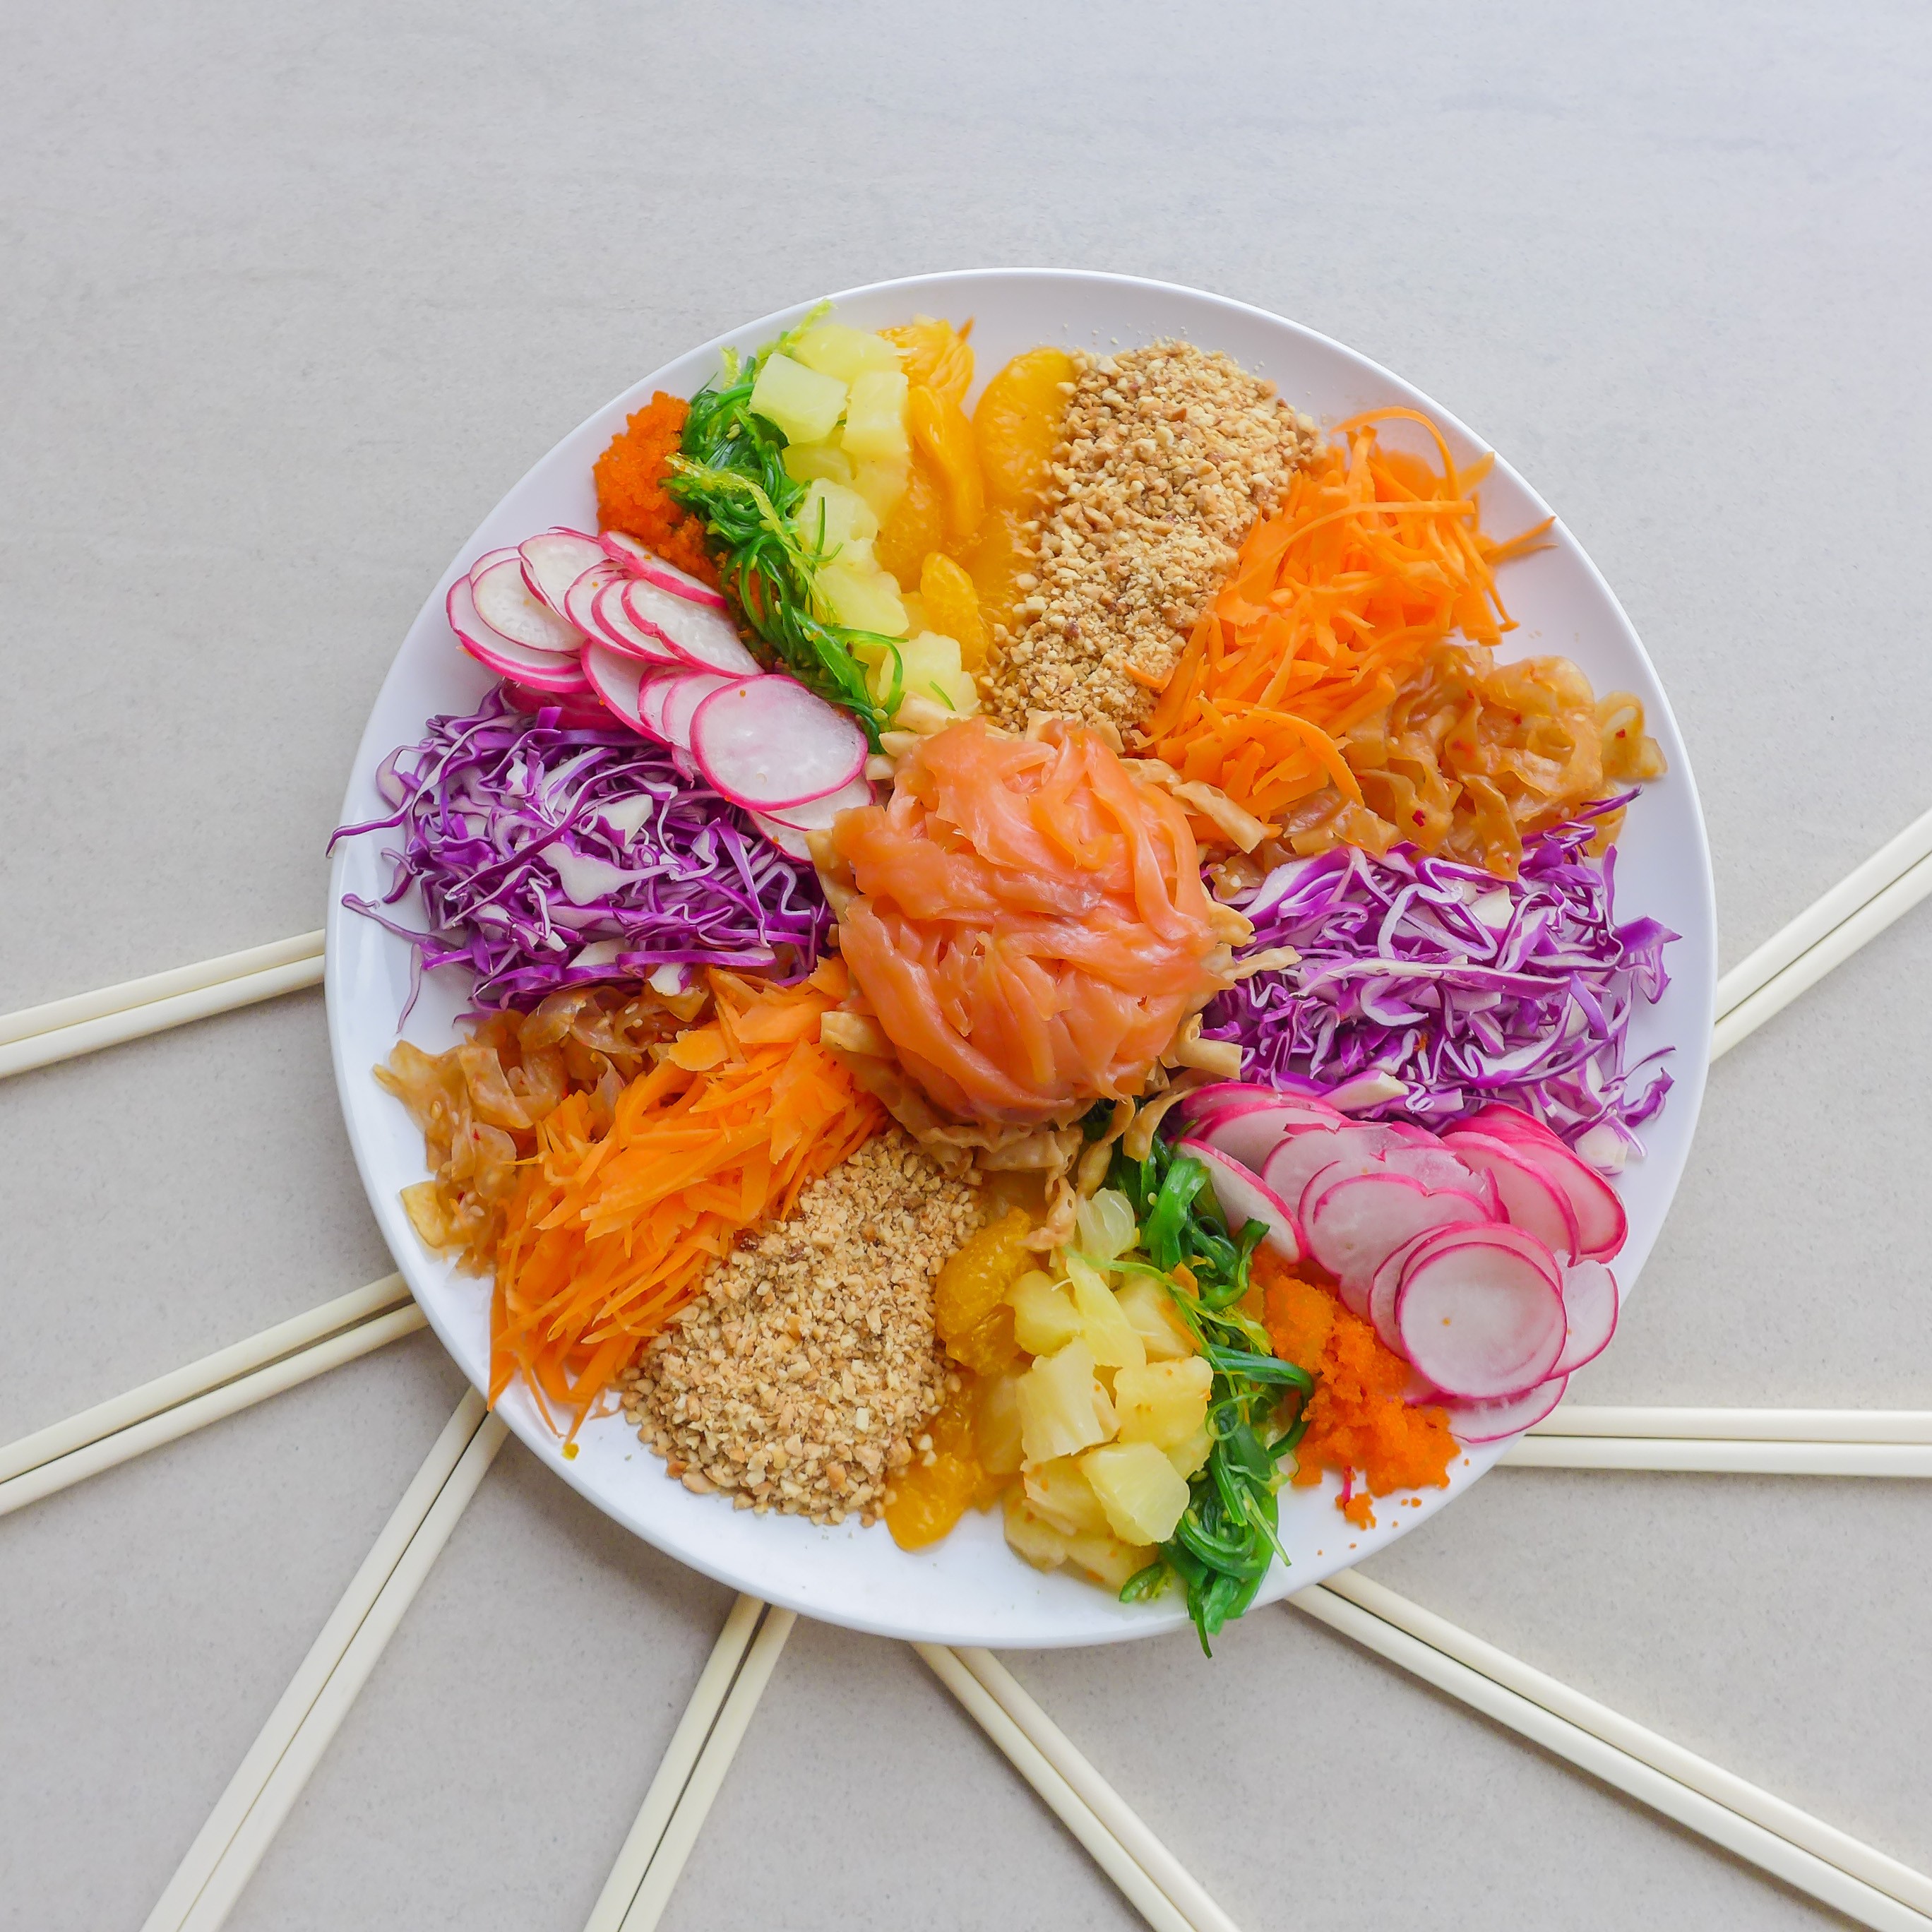 The festive tradition involving raw fish and the dramatic tossing of ingredients can be traced back to Singapore and its “Four Heavenly Kings” of the 1960s